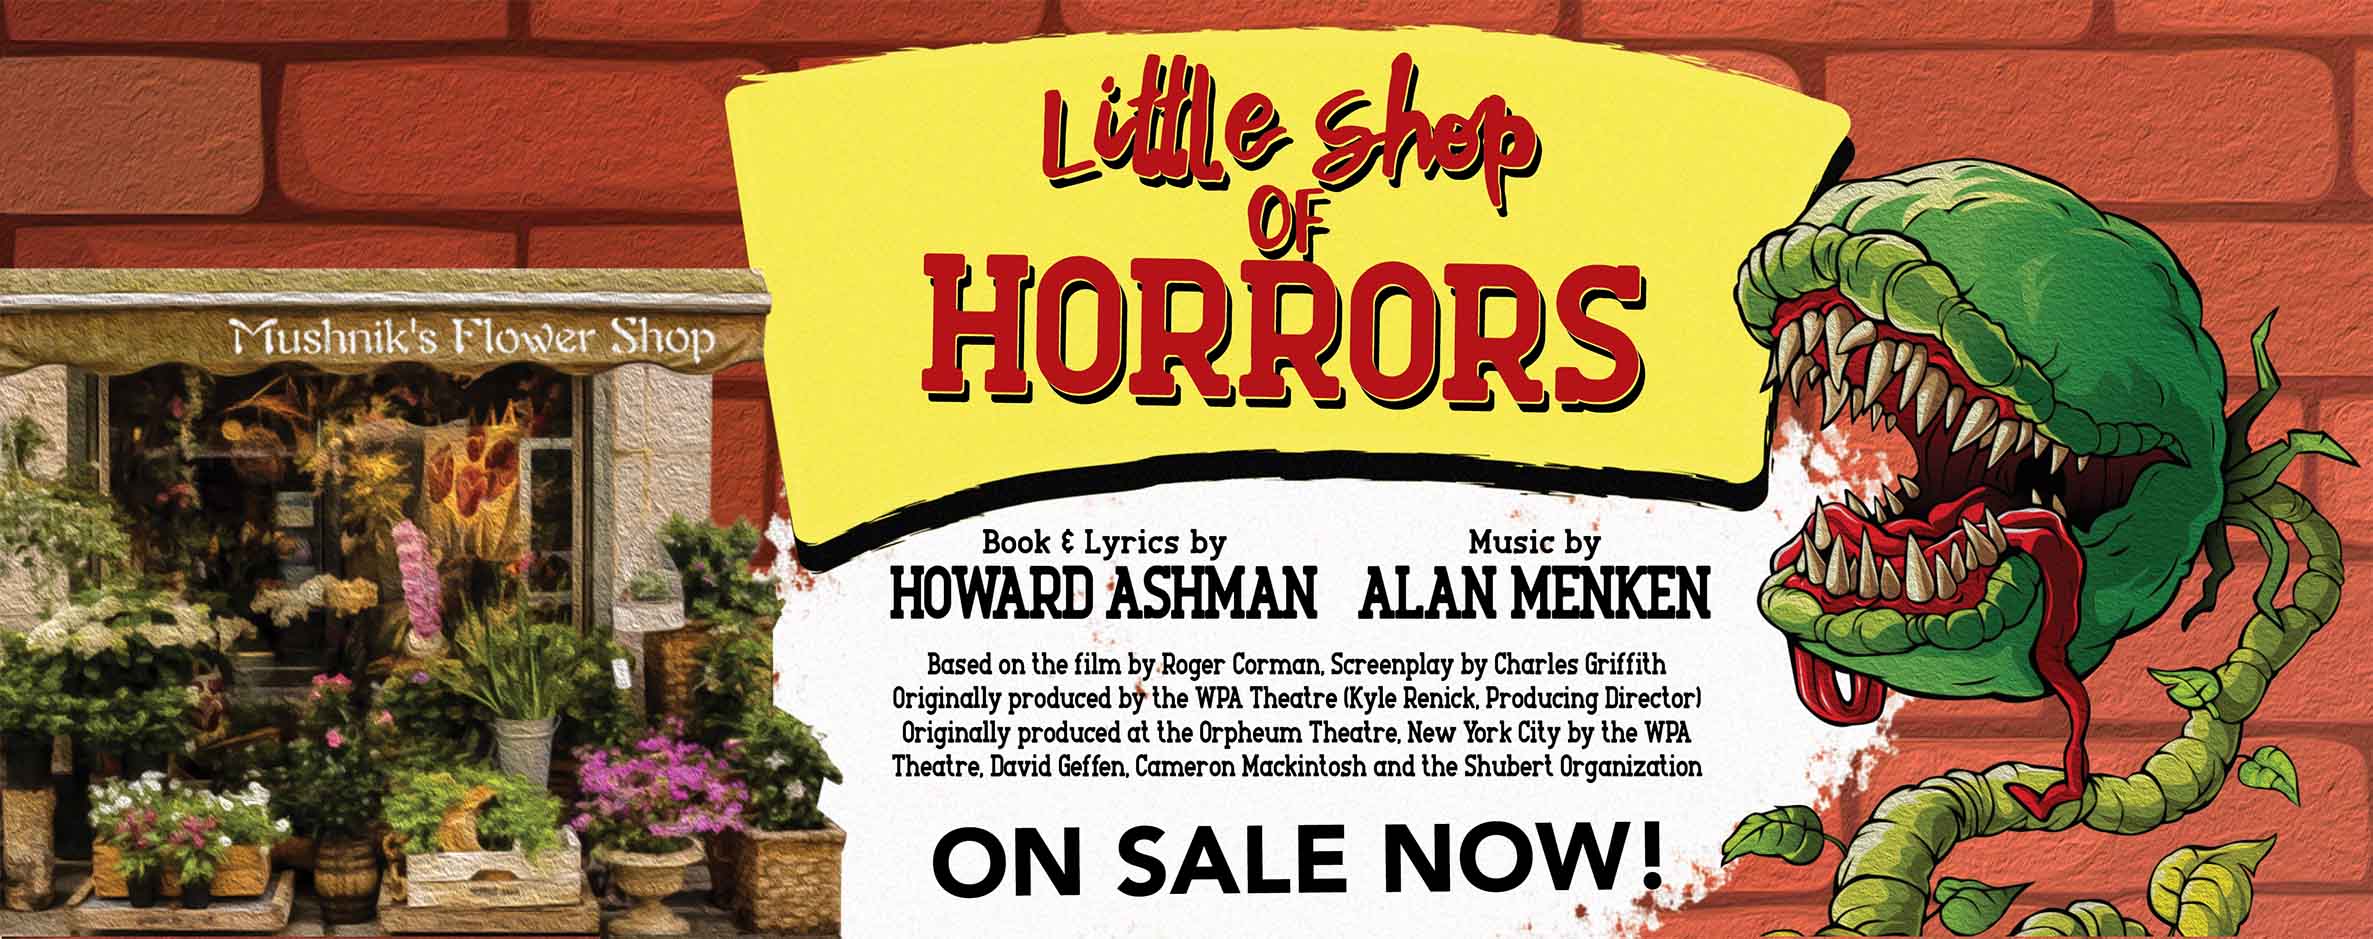 Little Shop of Horrors - On Sale Now!